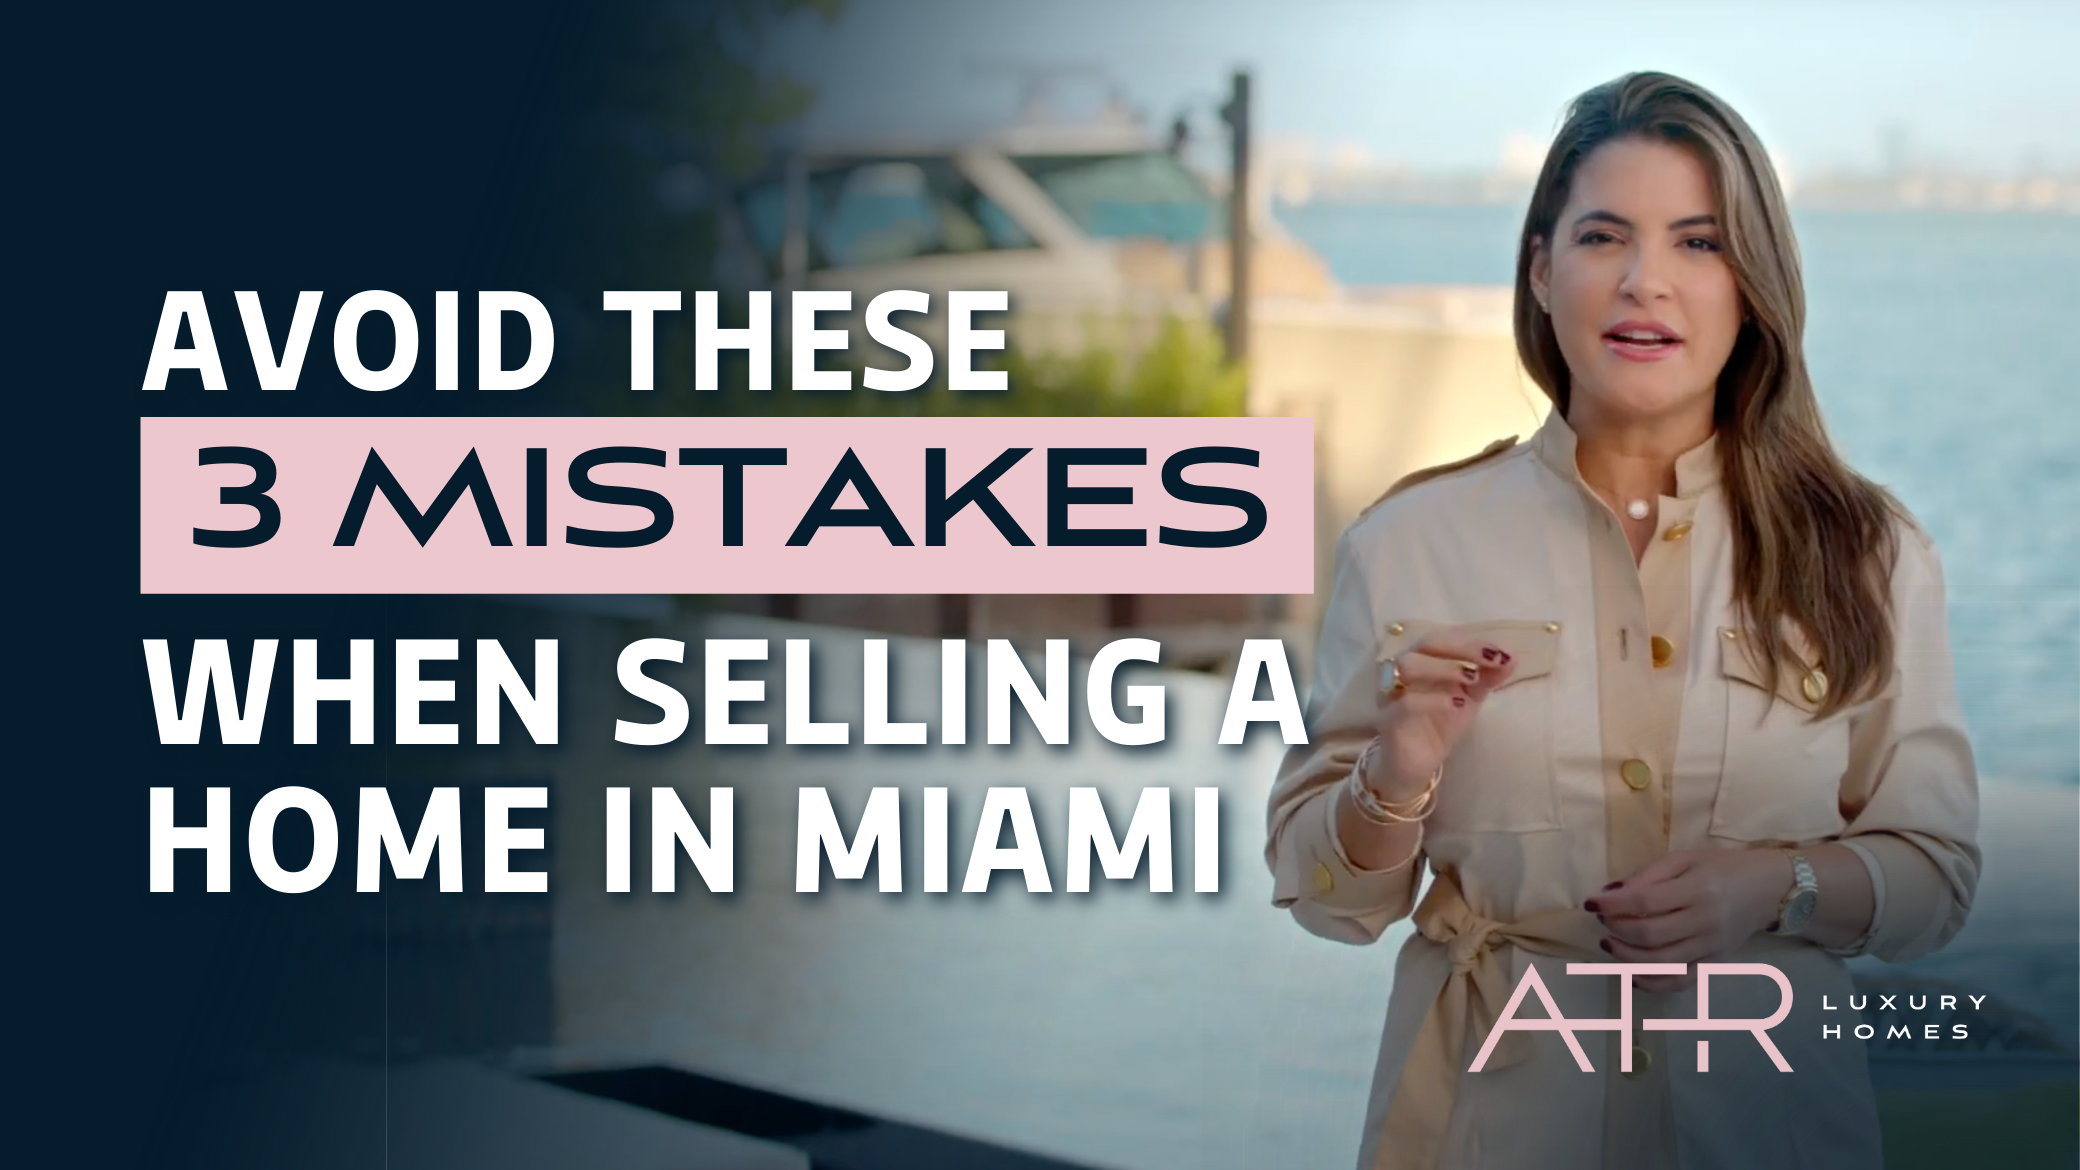 Avoid these 3 MISTAKES When Selling your Home in Miami